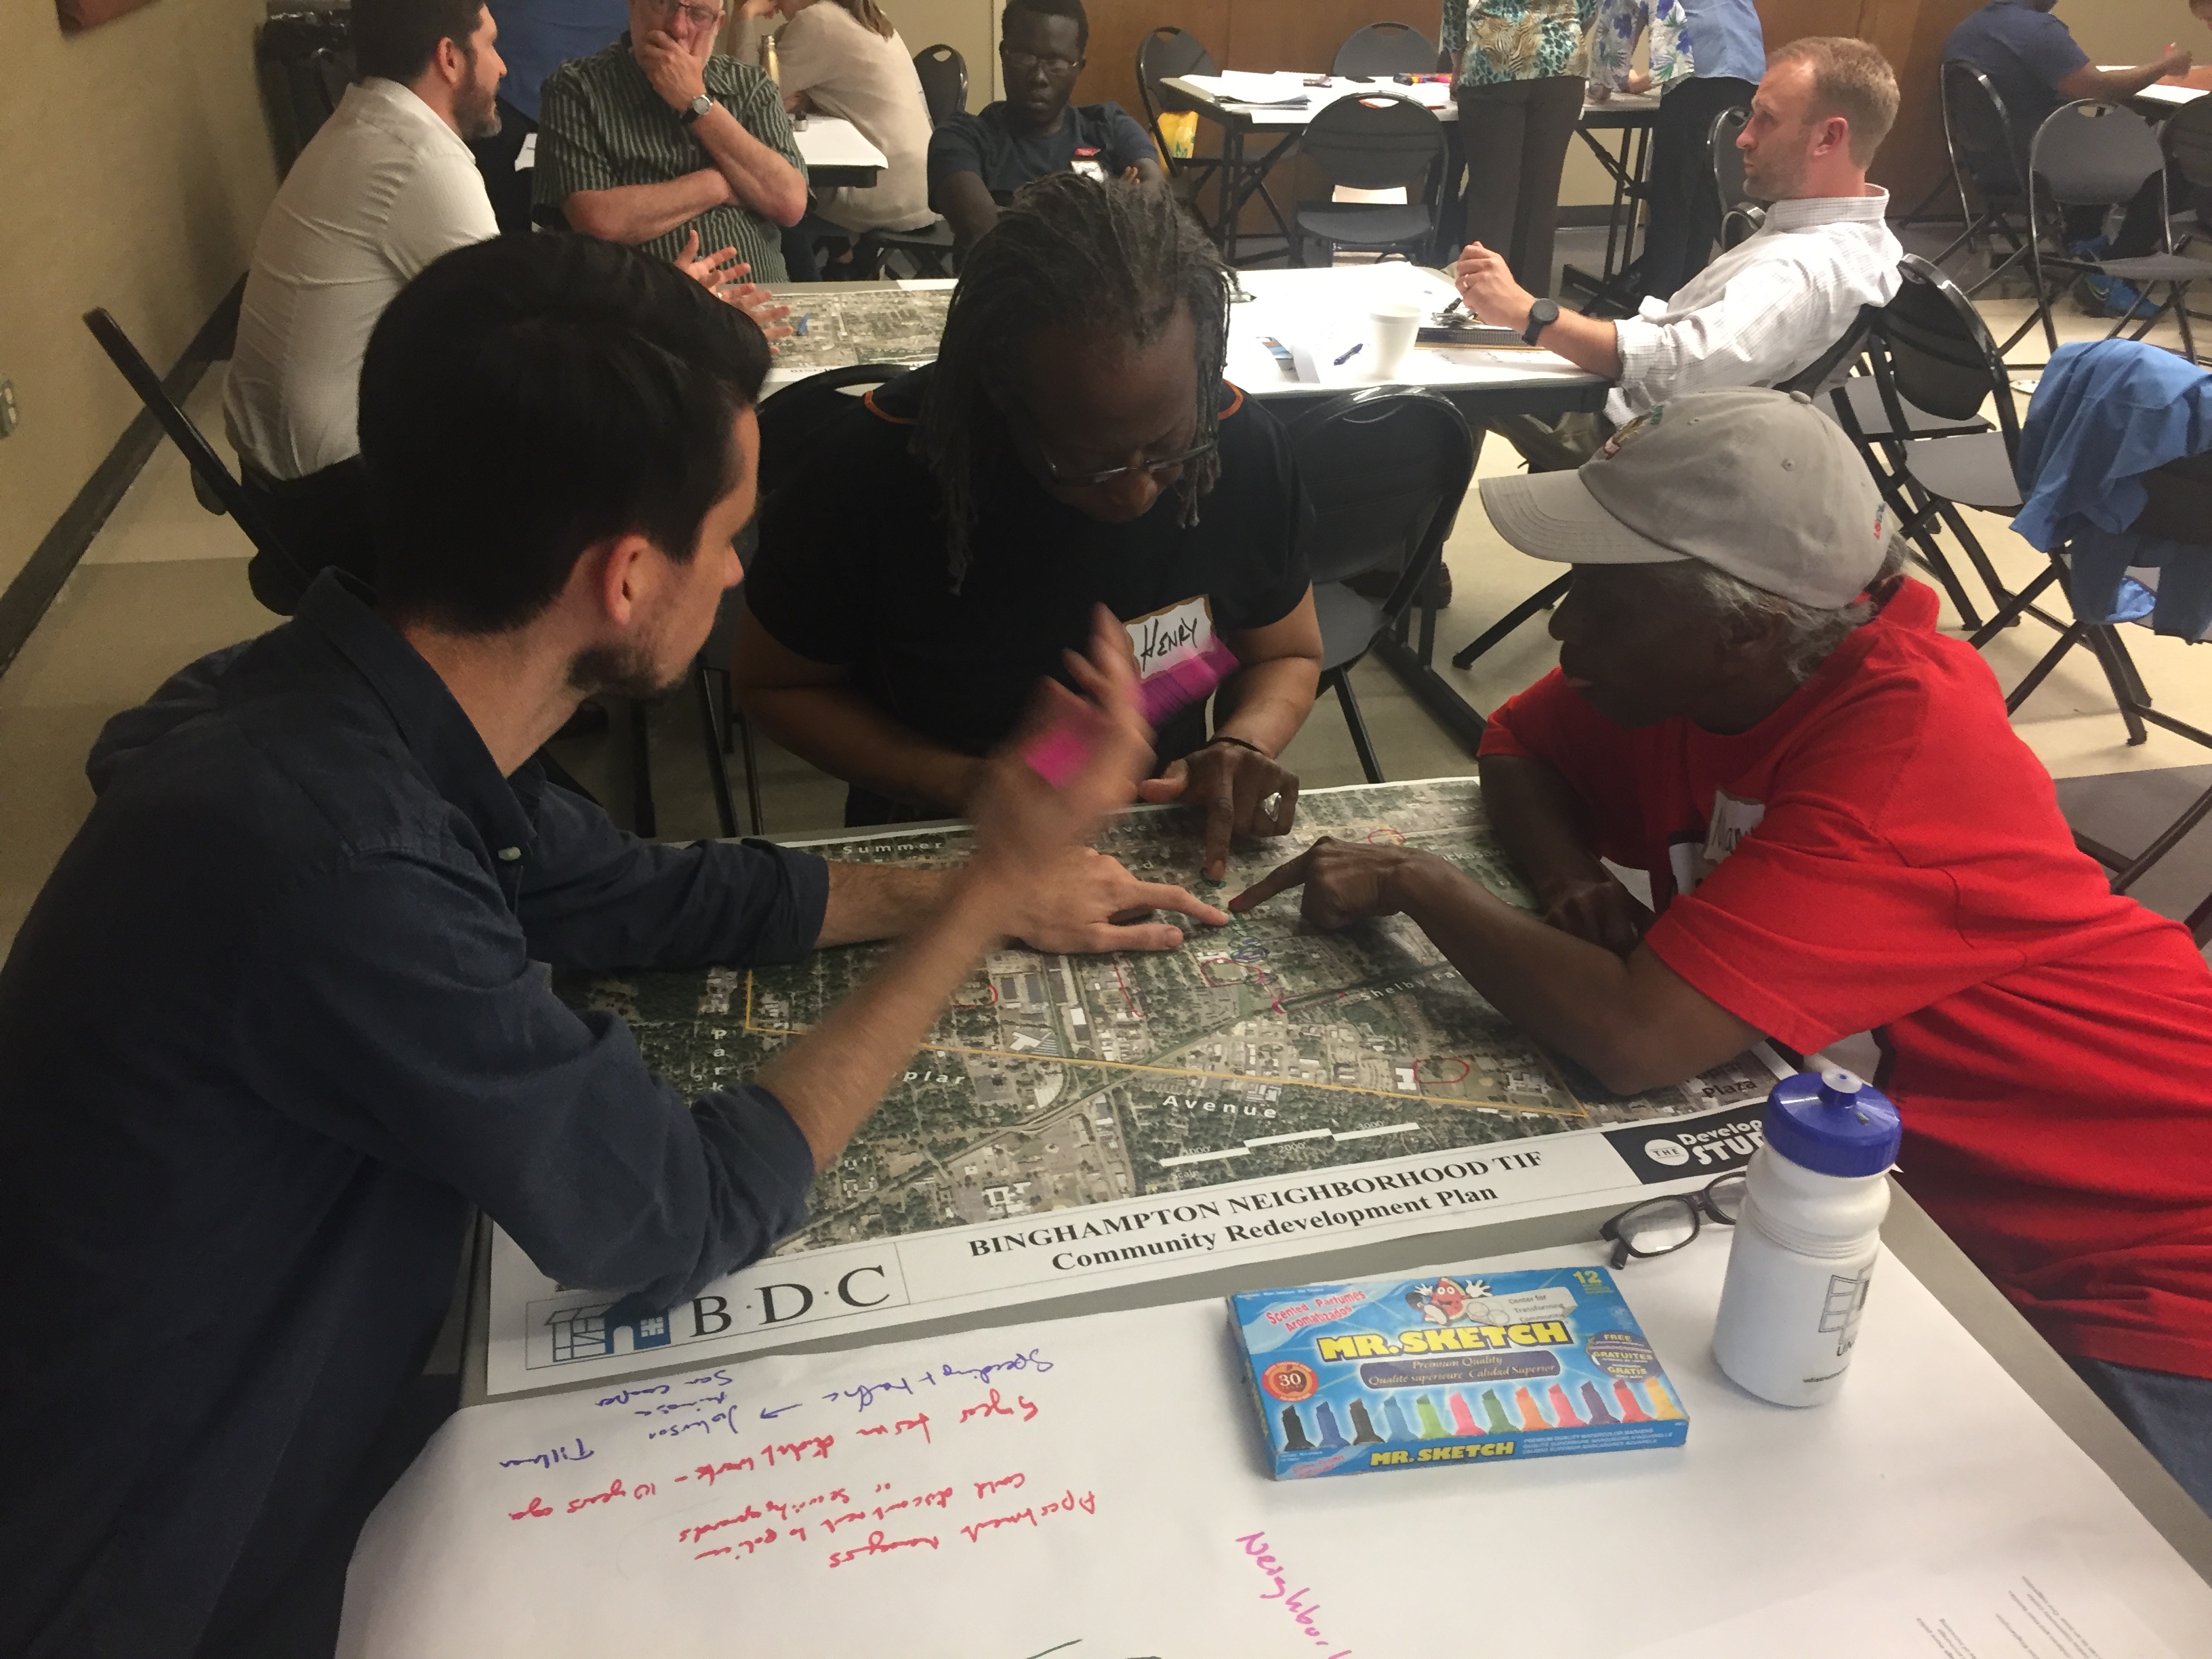 TIF community task force members Kenny Latta, Henry Nelson, and Mary Williams (left to right) at a May meeting working together to understand what they've heard from community members. (Submitted)